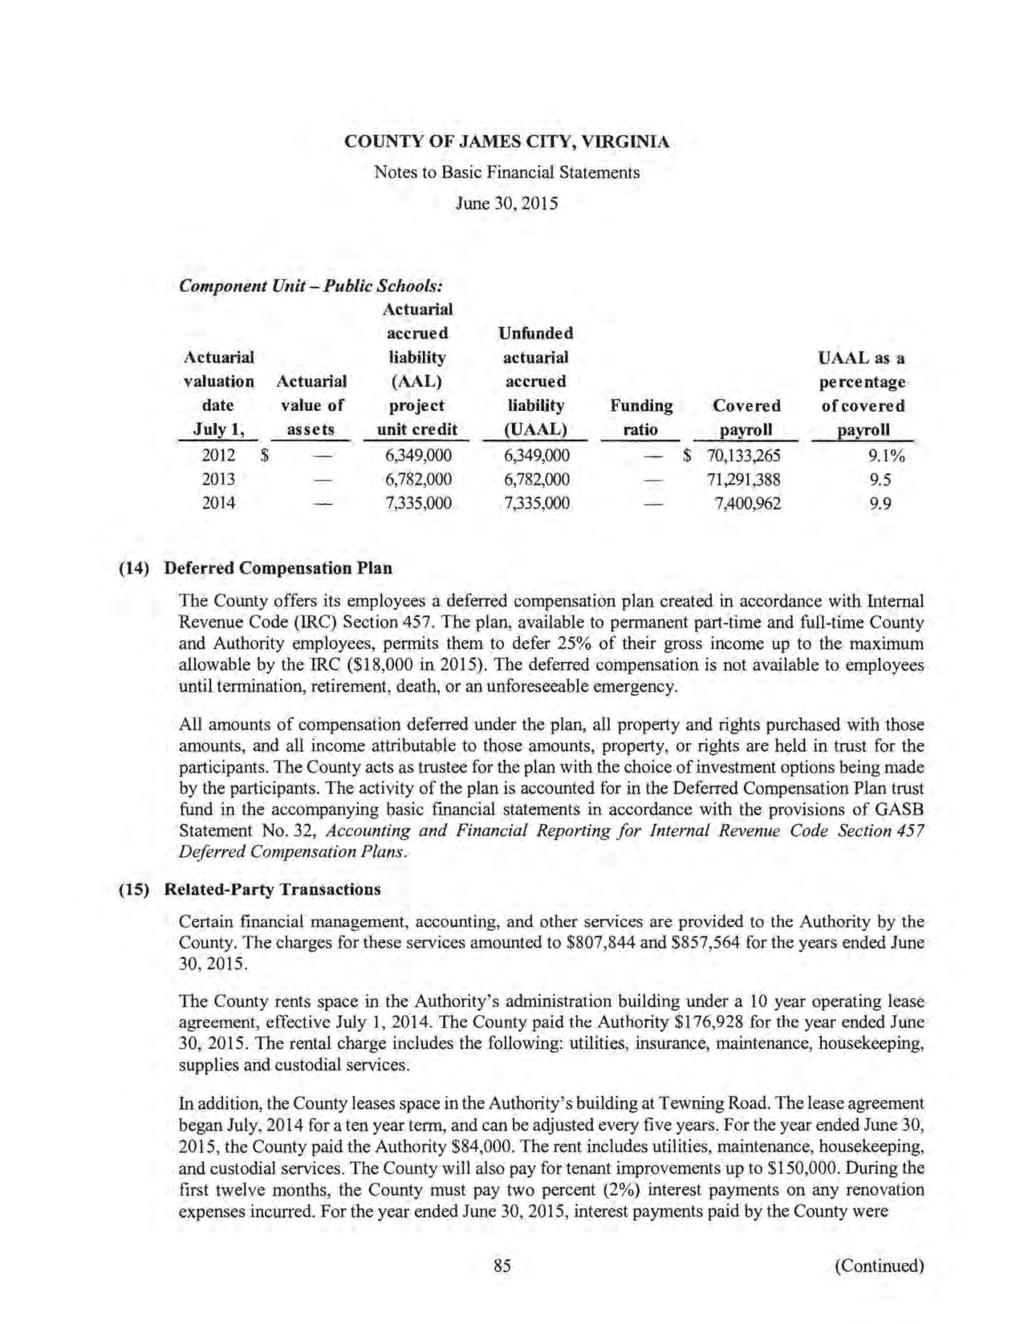 COUNTY OF JAMES CITY, VIRGINIA Notes to Basic Financial Statements June 30, 2015 Component Unit - Public Schools: Actuarial accrued Unfunded Actuarial liability actuarial valuation Actuarial (AAL)